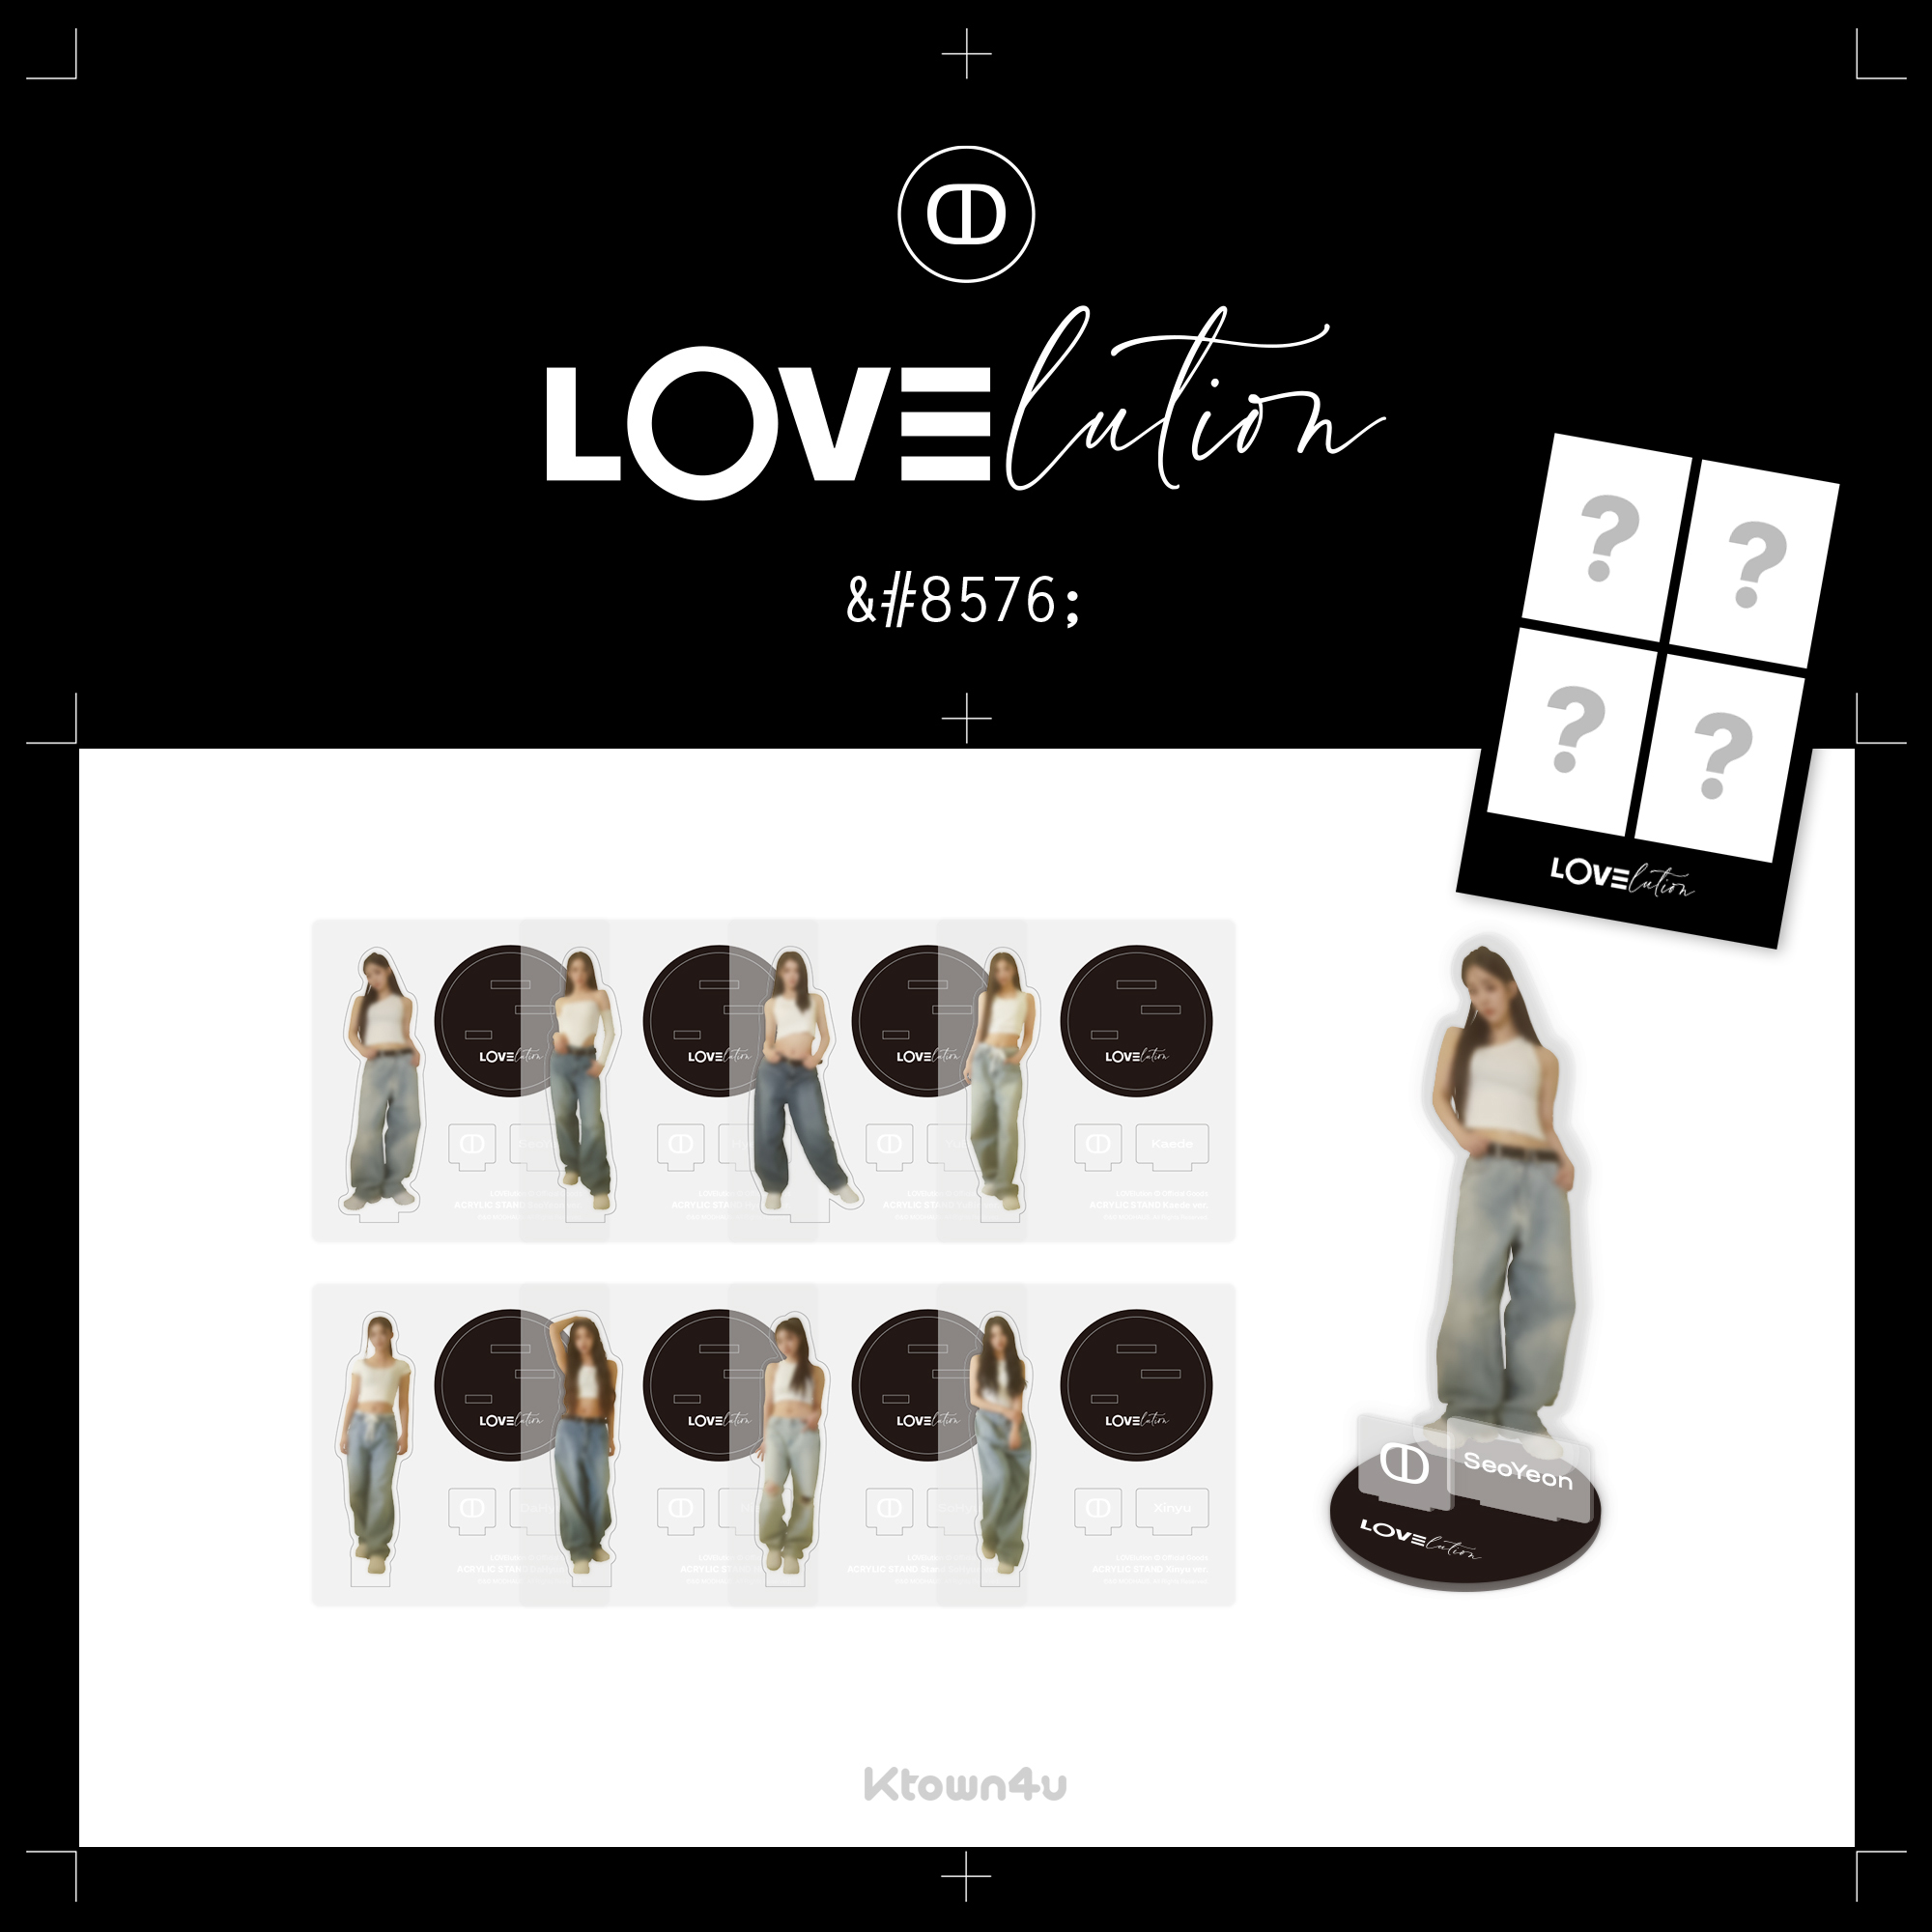 [Special Gift] tripleS - ACRYLIC STAND [LOVElution]